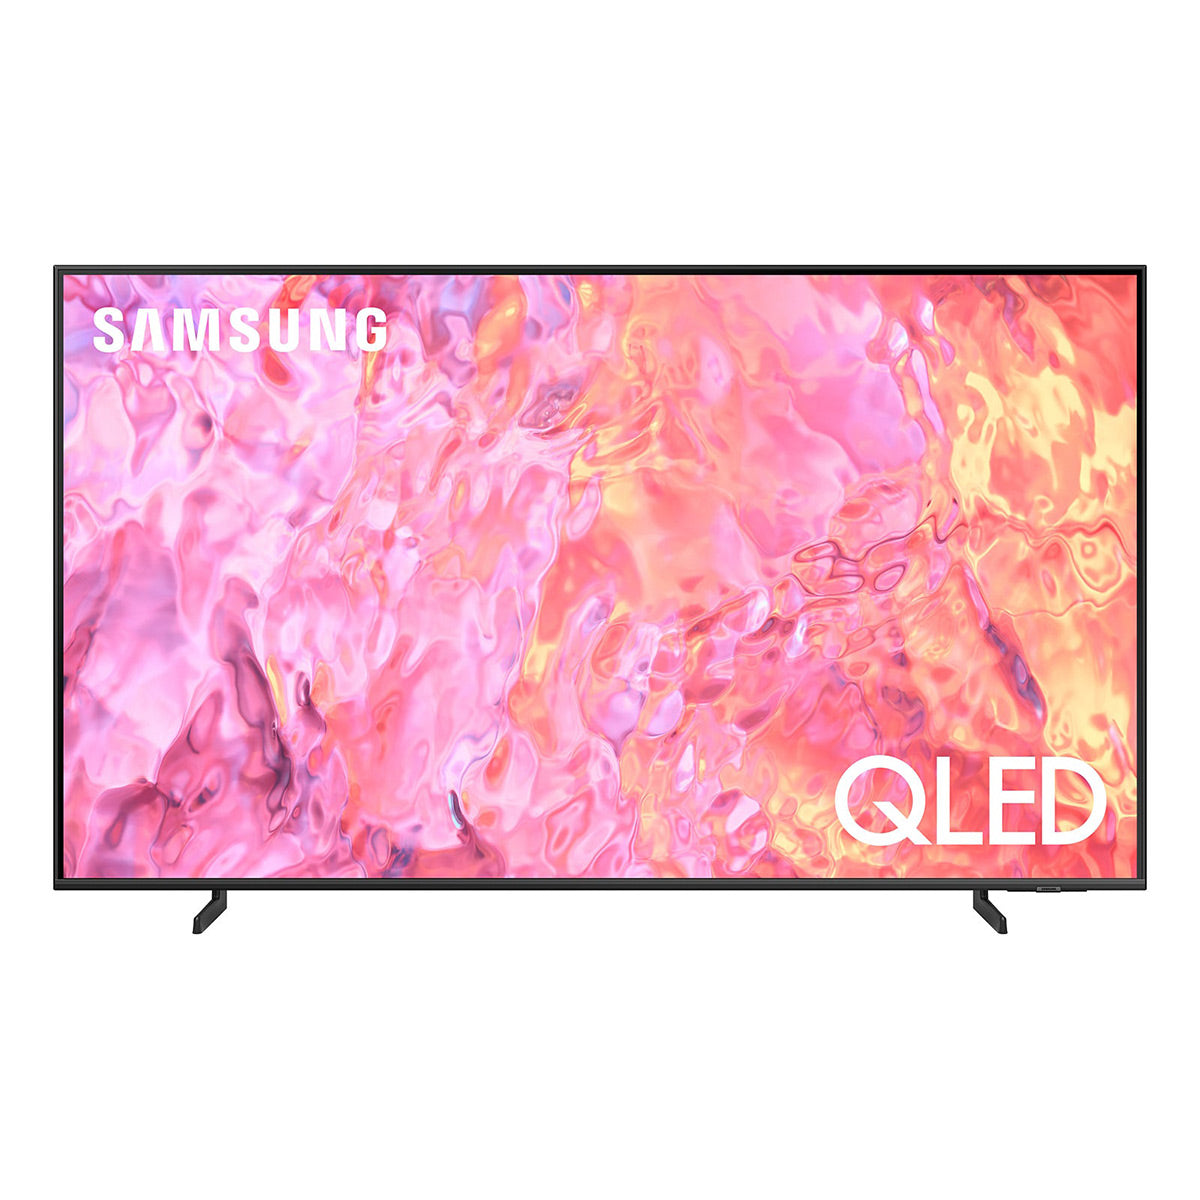 Samsung QN70Q60CA 70" QLED 4K Smart TV with Quantum HDR, 100% Color Volume, Dual LED Backlights, & Object Tracking Sound (2023)